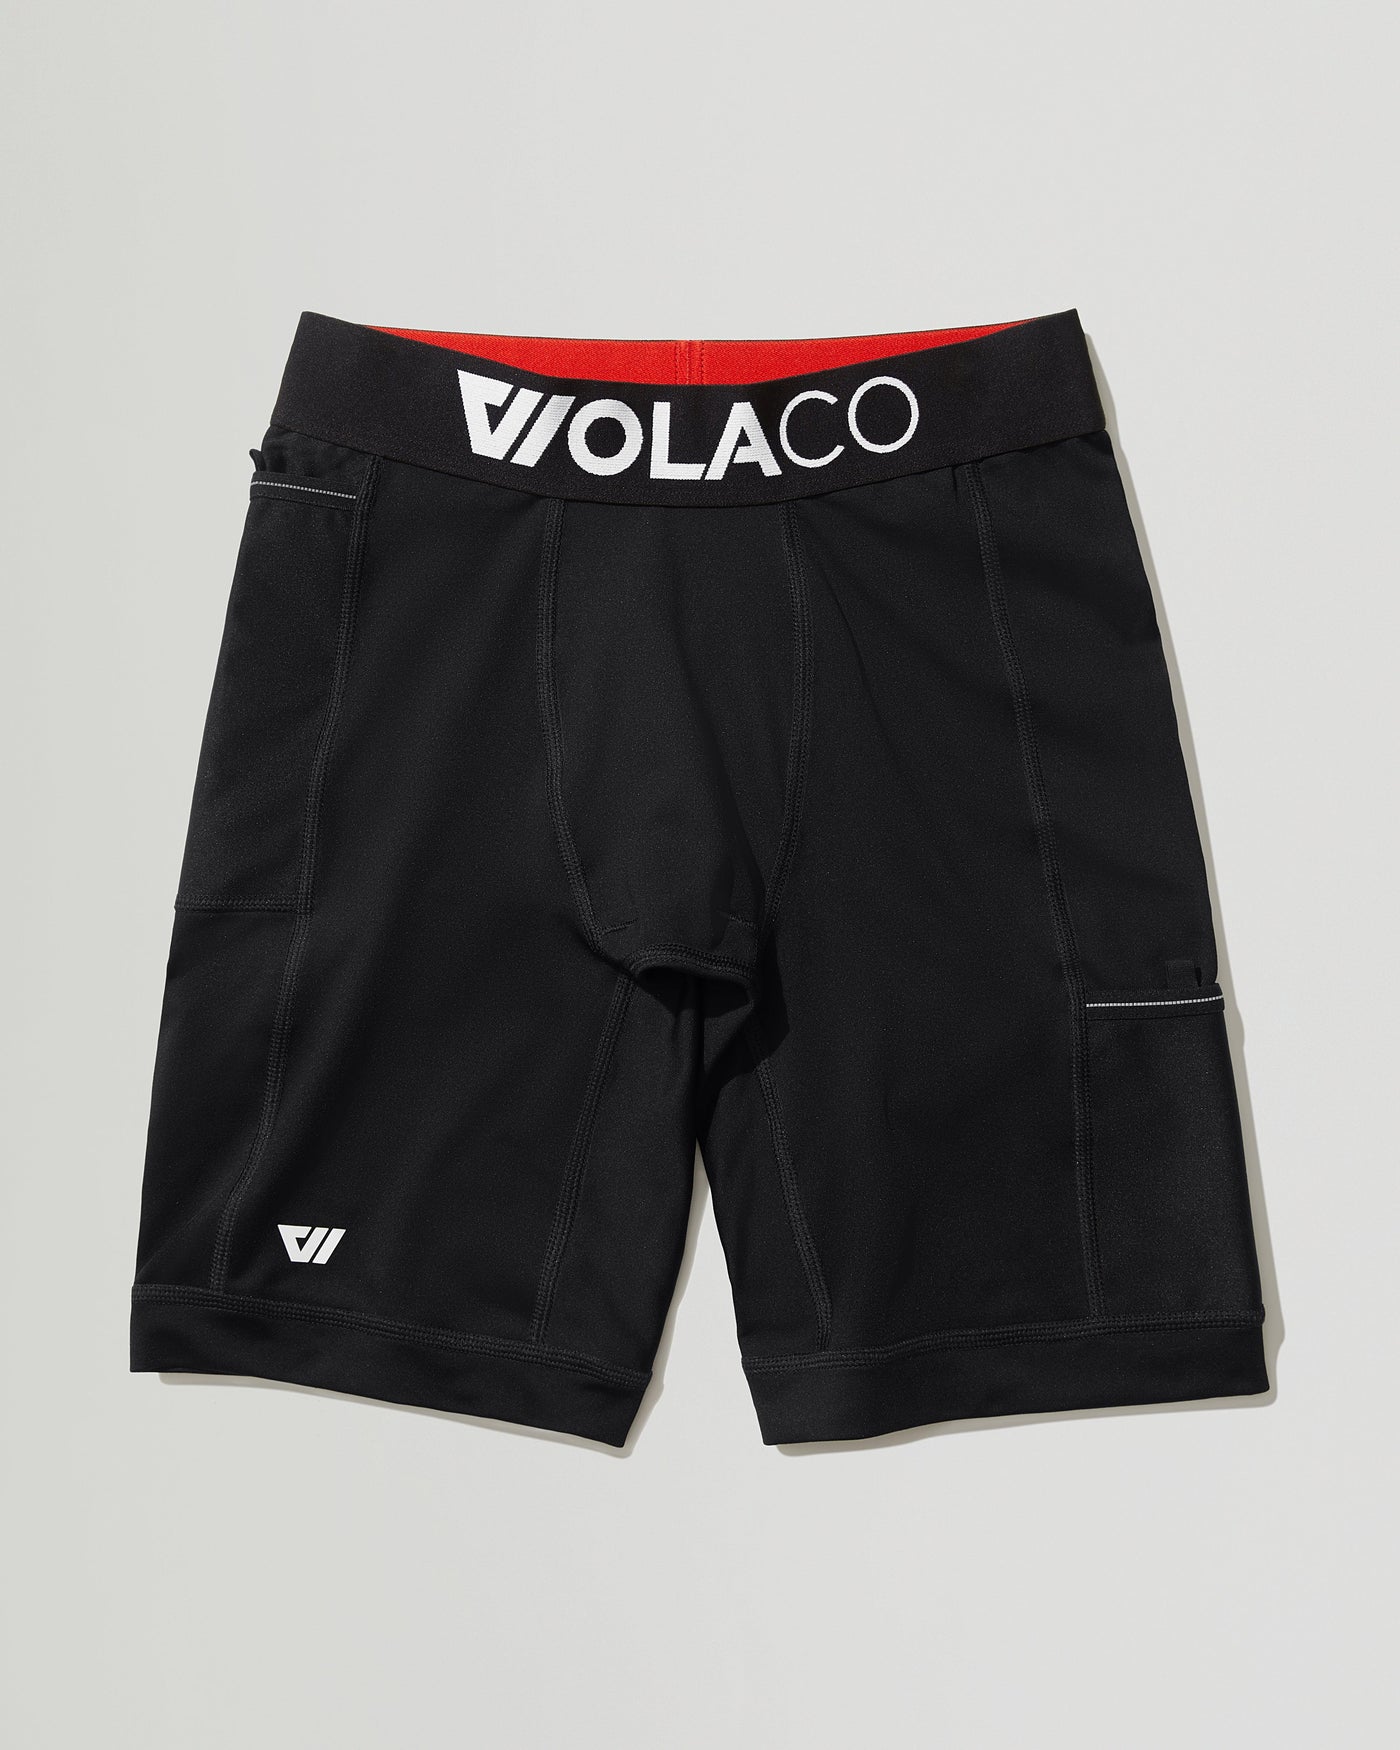 North Moore Short 2-Pack (Black and Black)